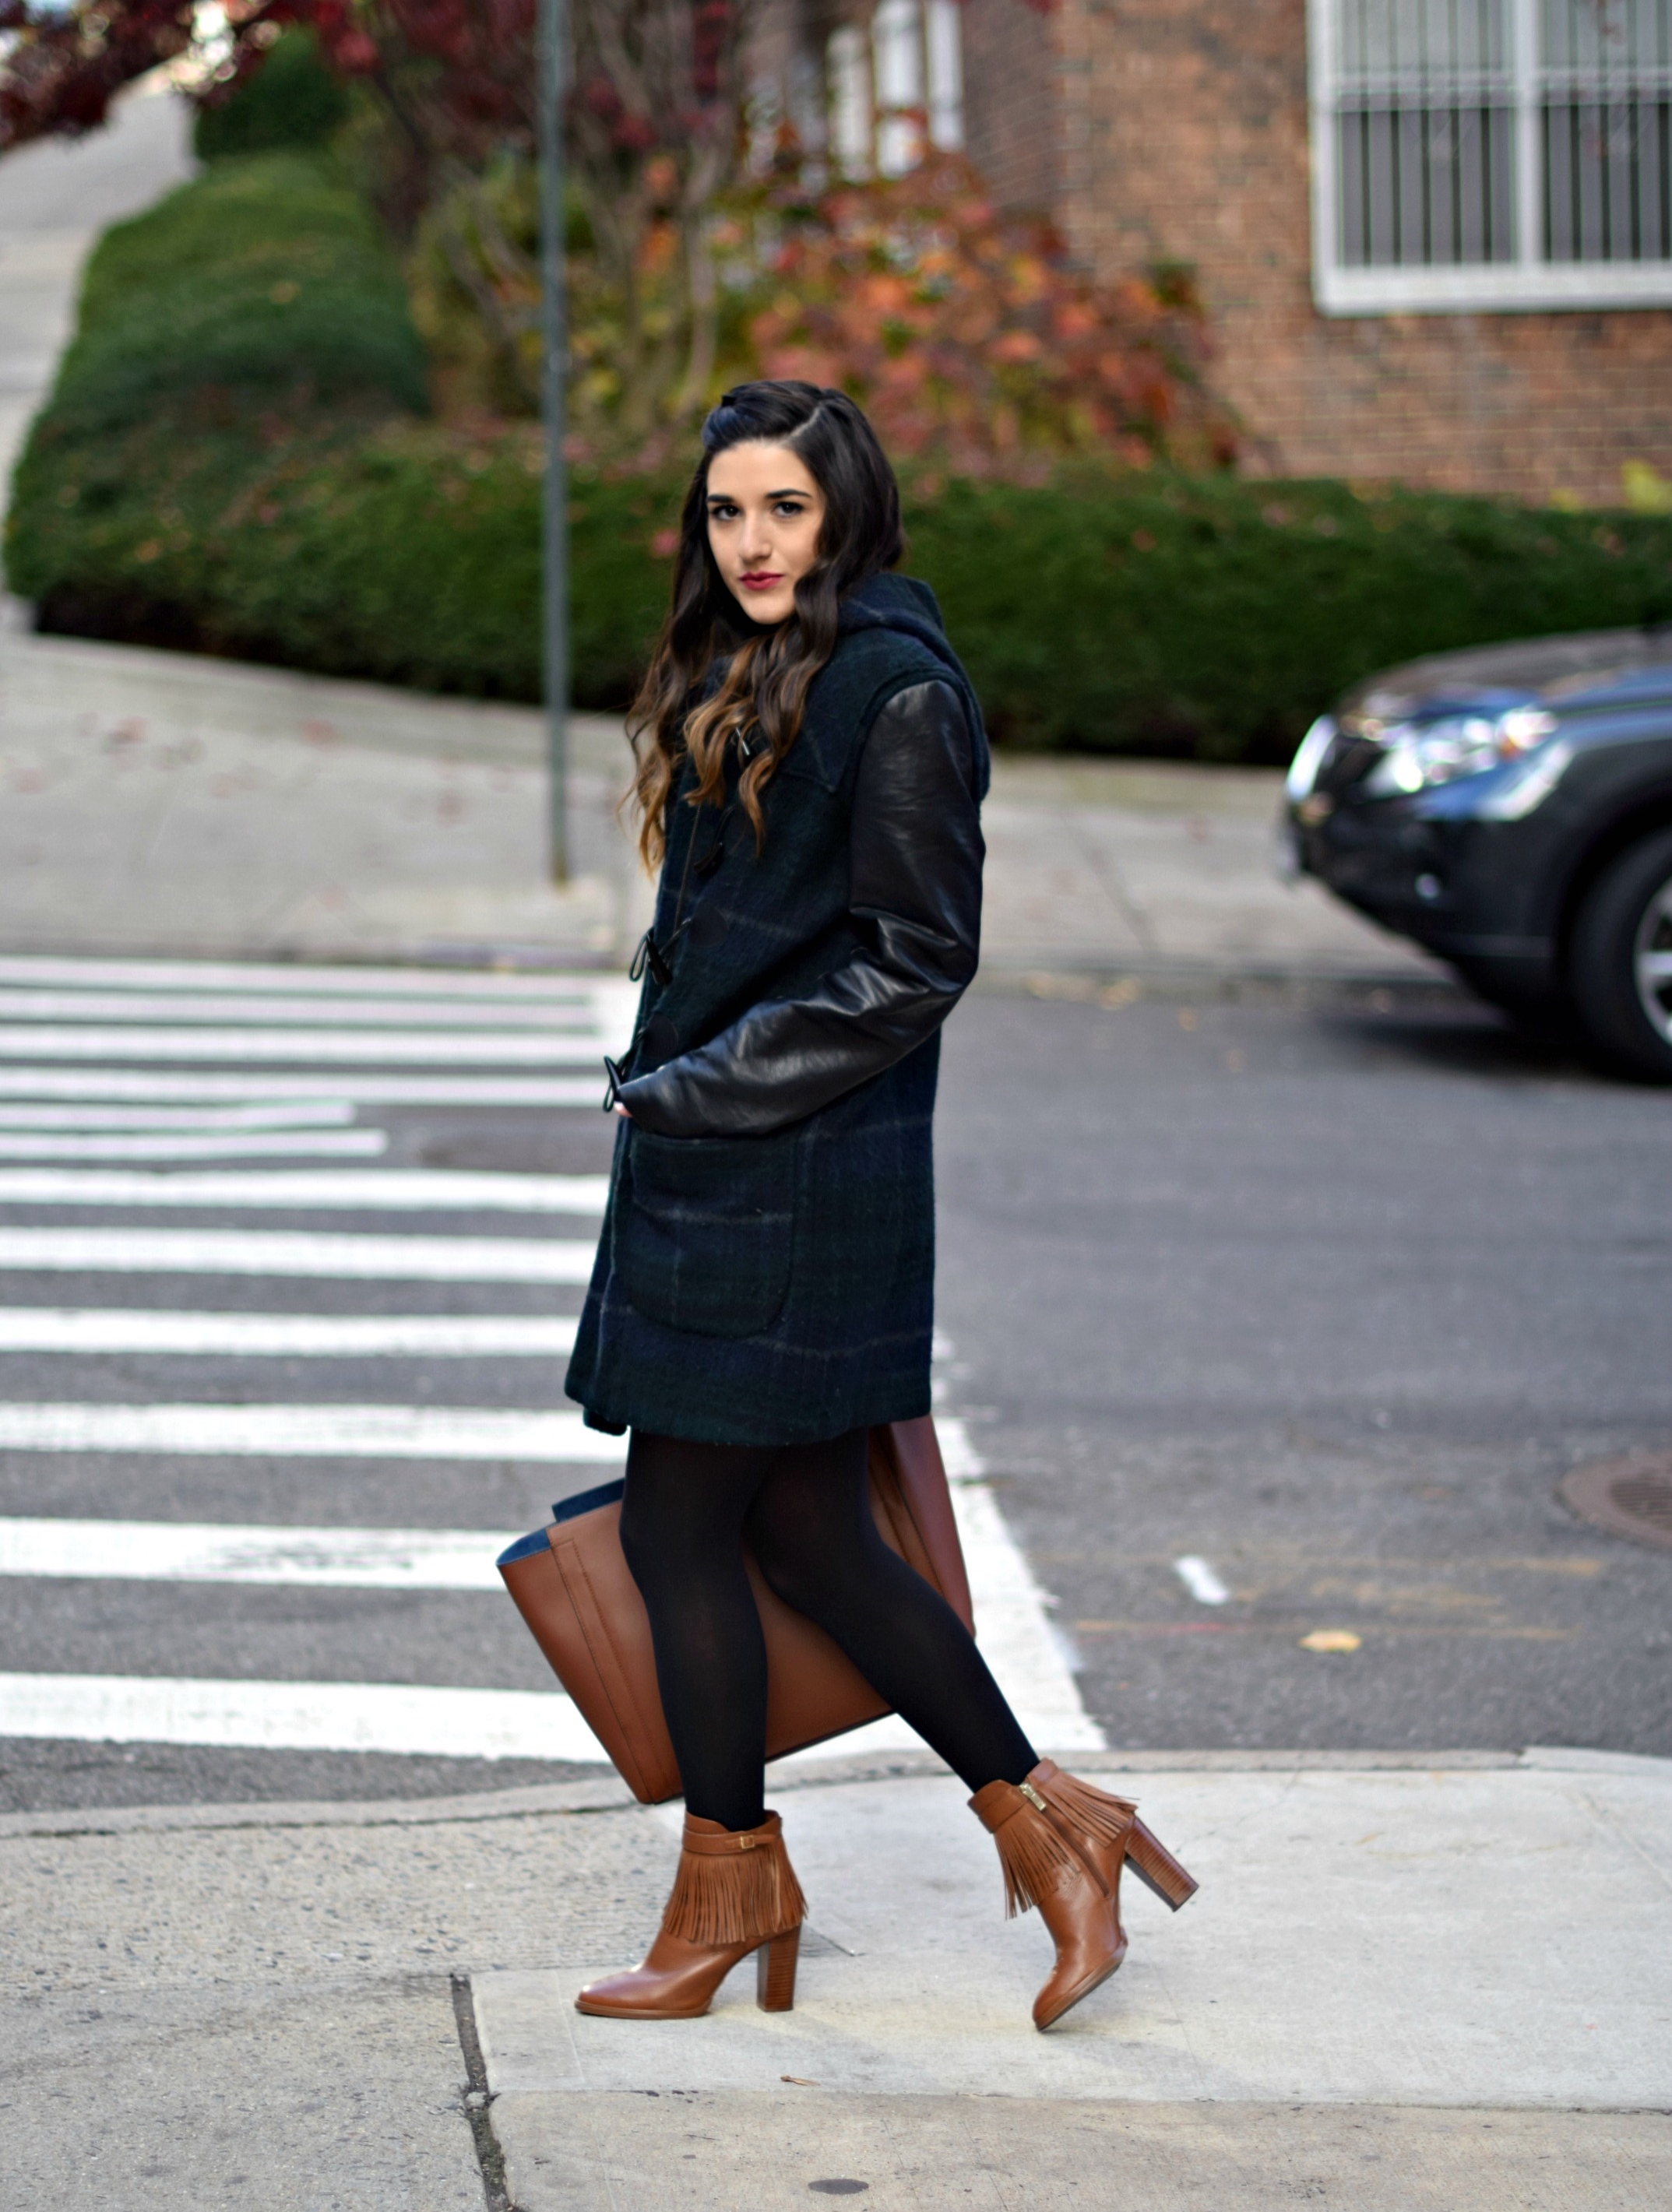 Navy Romper Fringe Booties Louboutins & Love Fashion Blog Esther Santer NYC Street Style Blogger Zara Plaid Coat Leather Sleeves Girl Women OOTD Outfit Soho Tote Ivanka Trump Accessories Black Tights Shoes Boots Winter Inspo Hair Braid Rings Jewelry.jpg